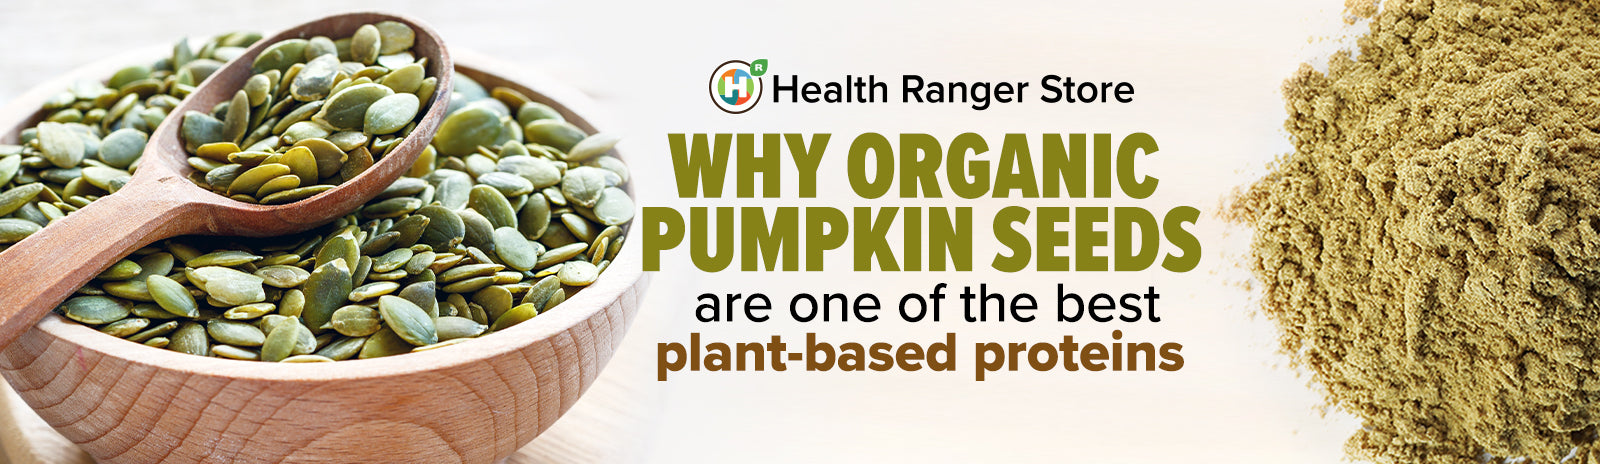 Organic pumpkin seeds are one of the best plant-based protein sources for vegans